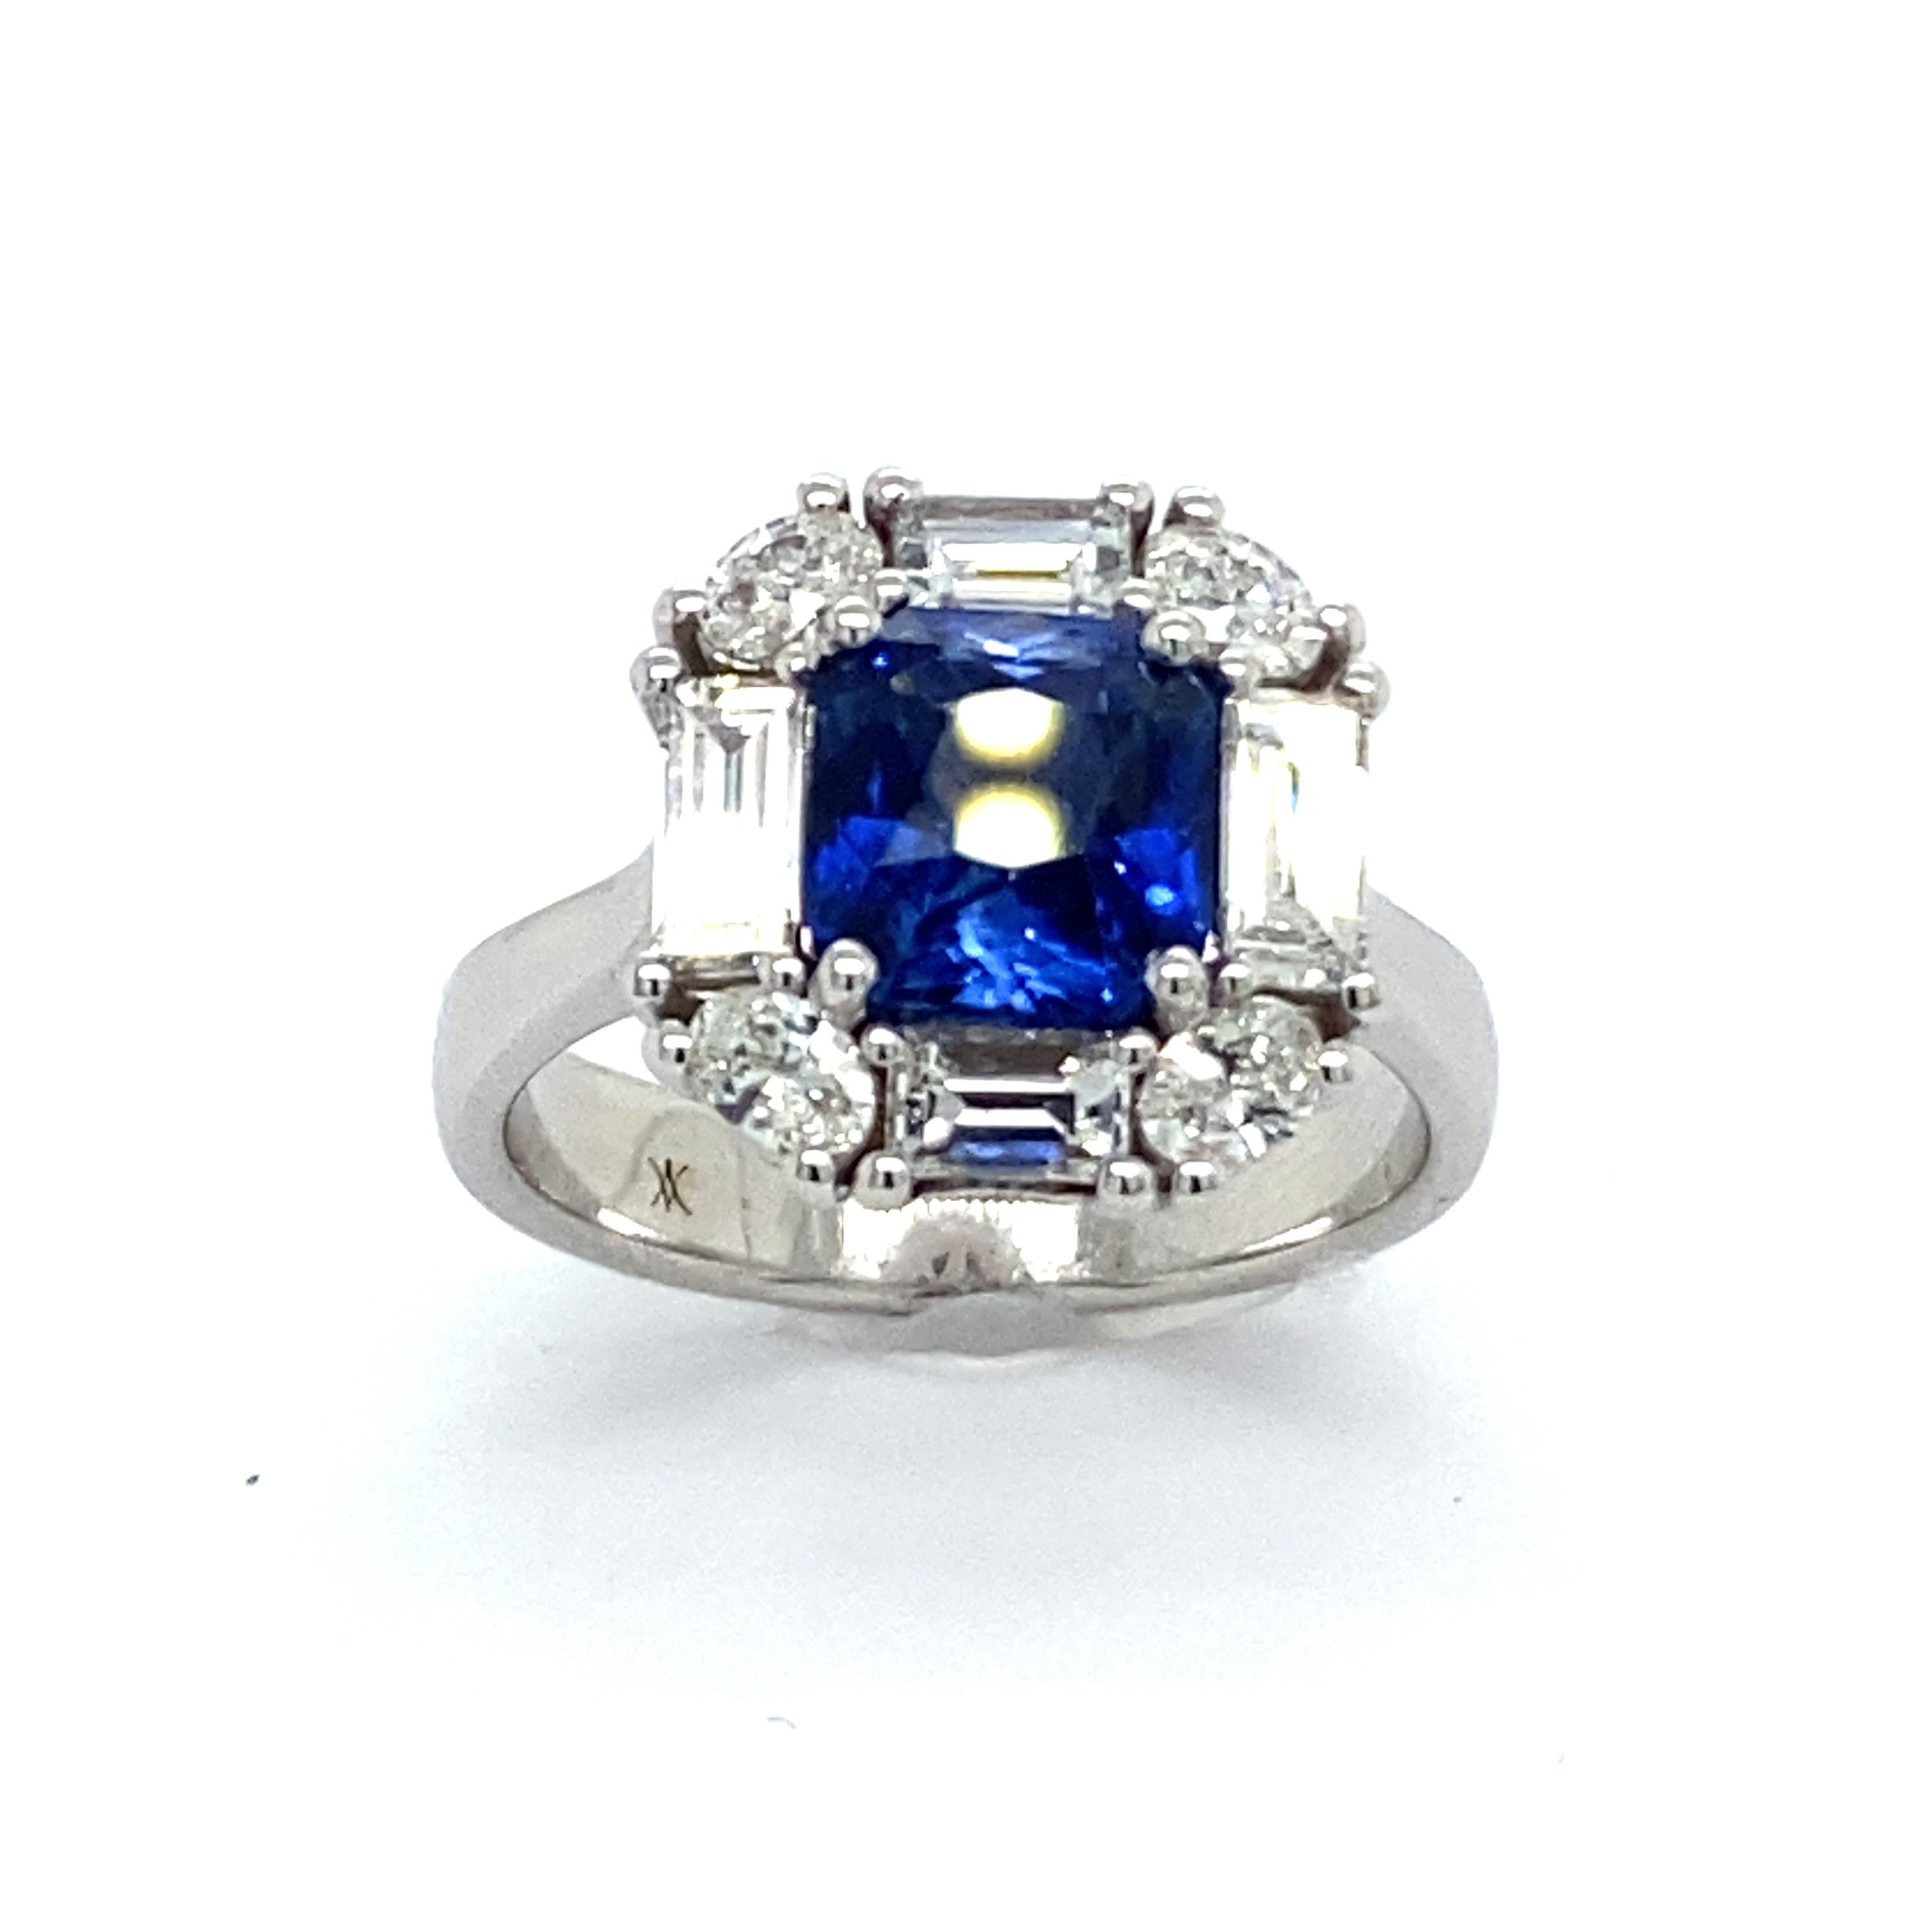 Discover this magnificent cocktail ring from the French collection of Mesure et Art du Temps, a truly exceptional piece. The ring is set with a dazzlingly beautiful natural blue sapphire, weighing 2.28 carats. The radiant shape of the sapphire adds